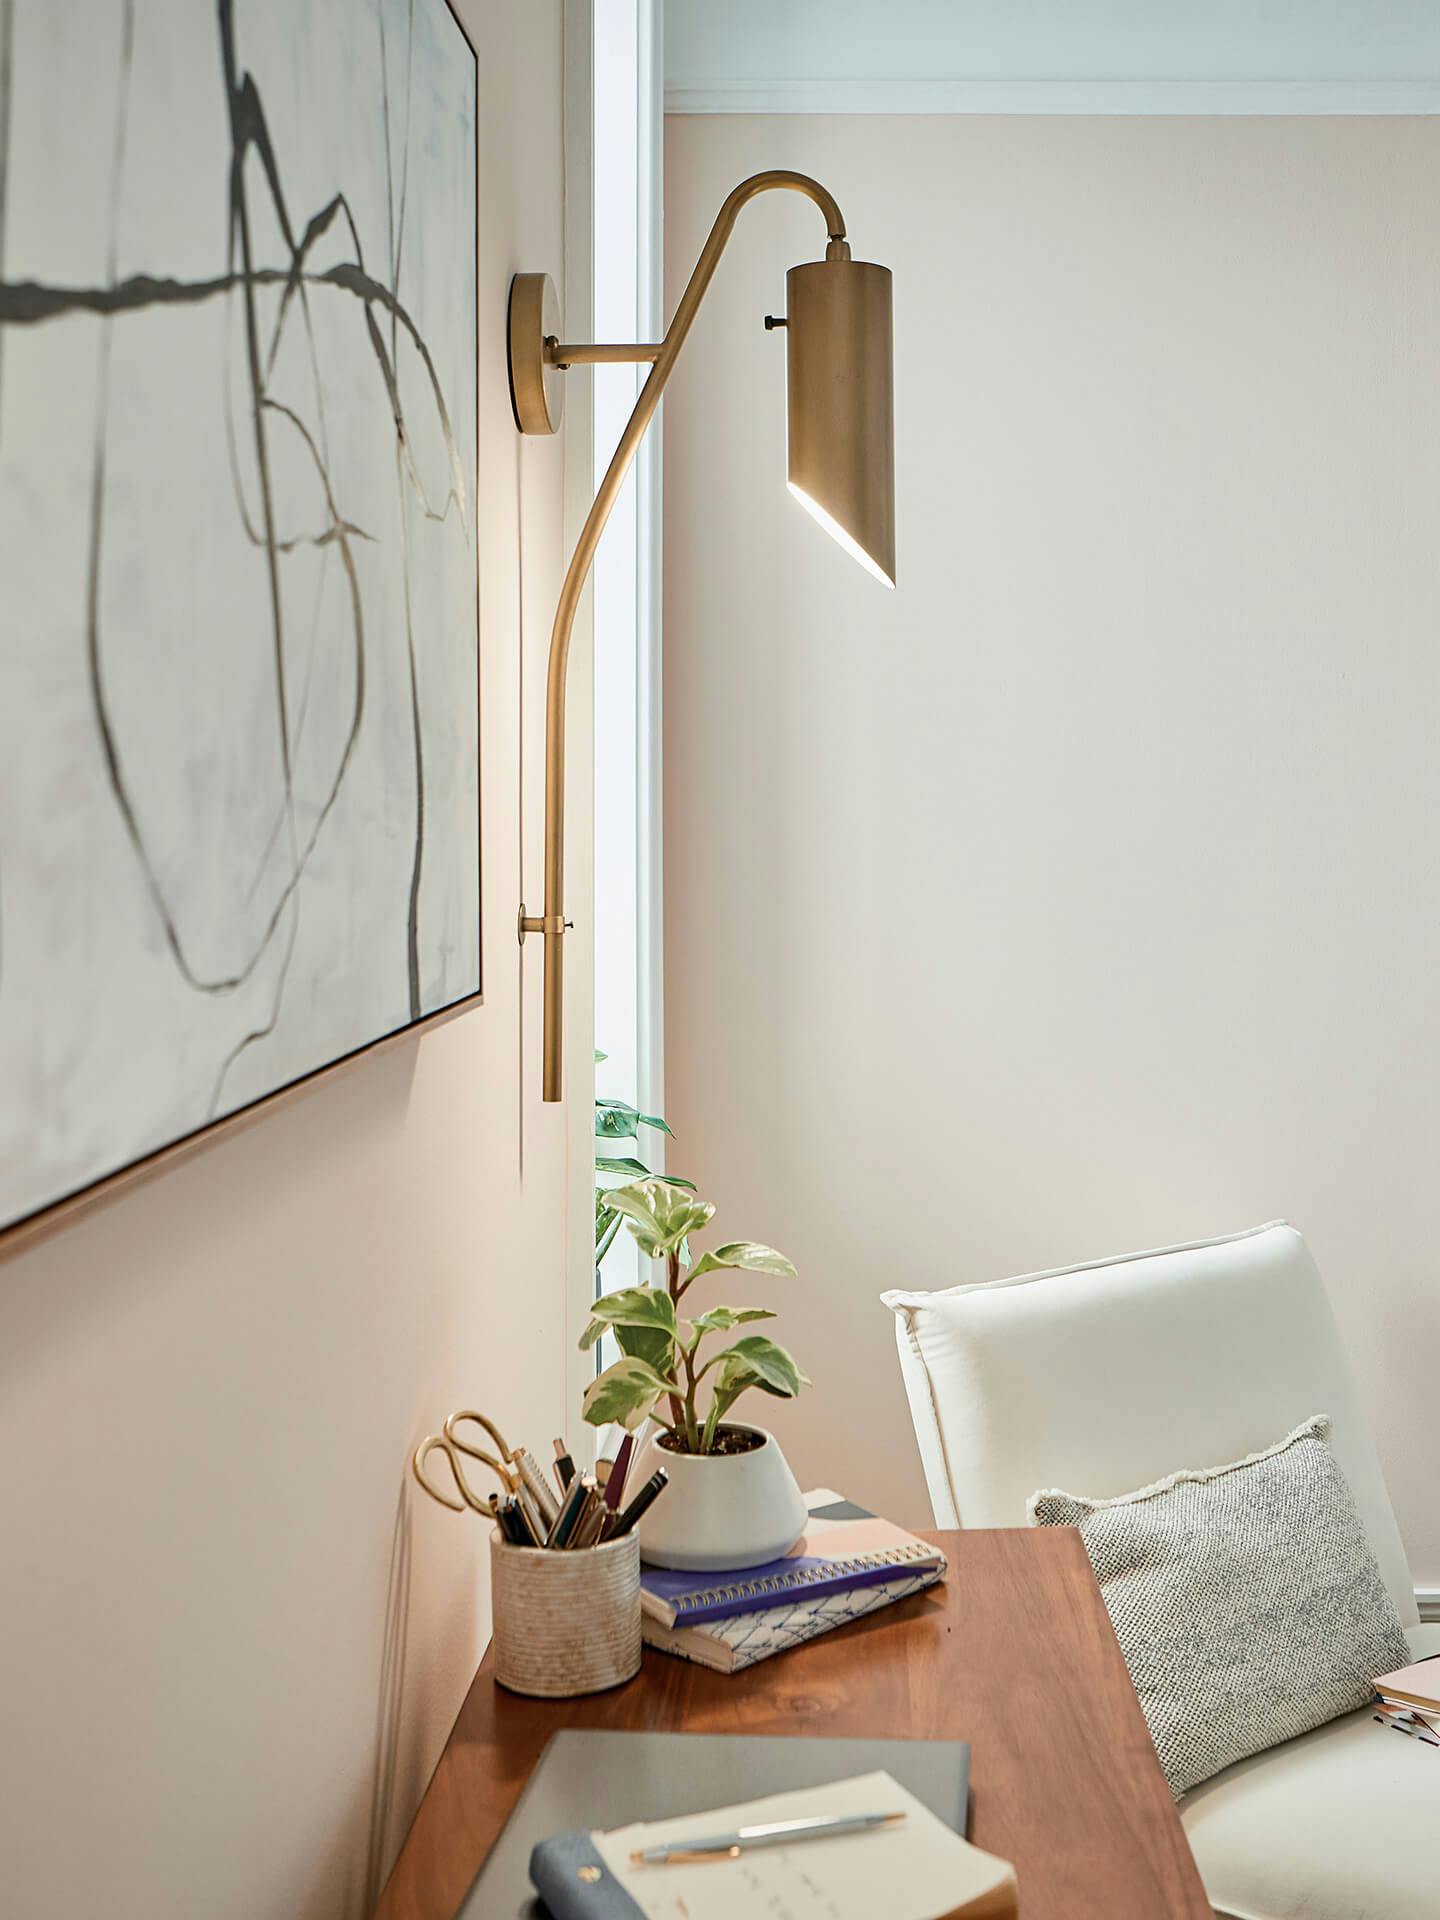 Trentino wall sconce in office during the day.